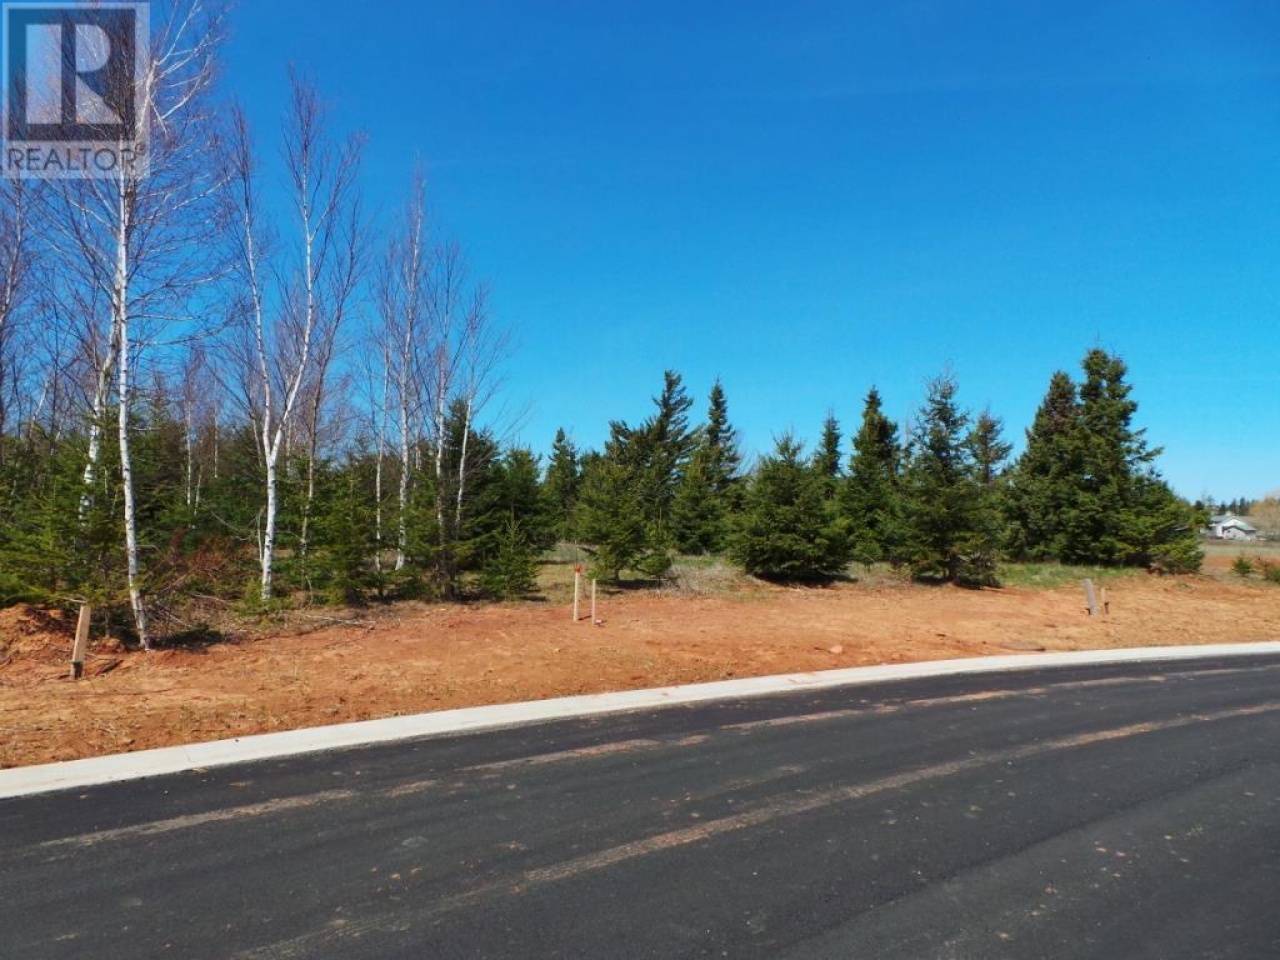 Lot 20-7 Waterview HeightsLot 20-7 Waterview Heights, Summerside, Prince Edward Island C1N6H5, ,Vacant Land,For Sale,Lot 20-7 Waterview Heights,202111411